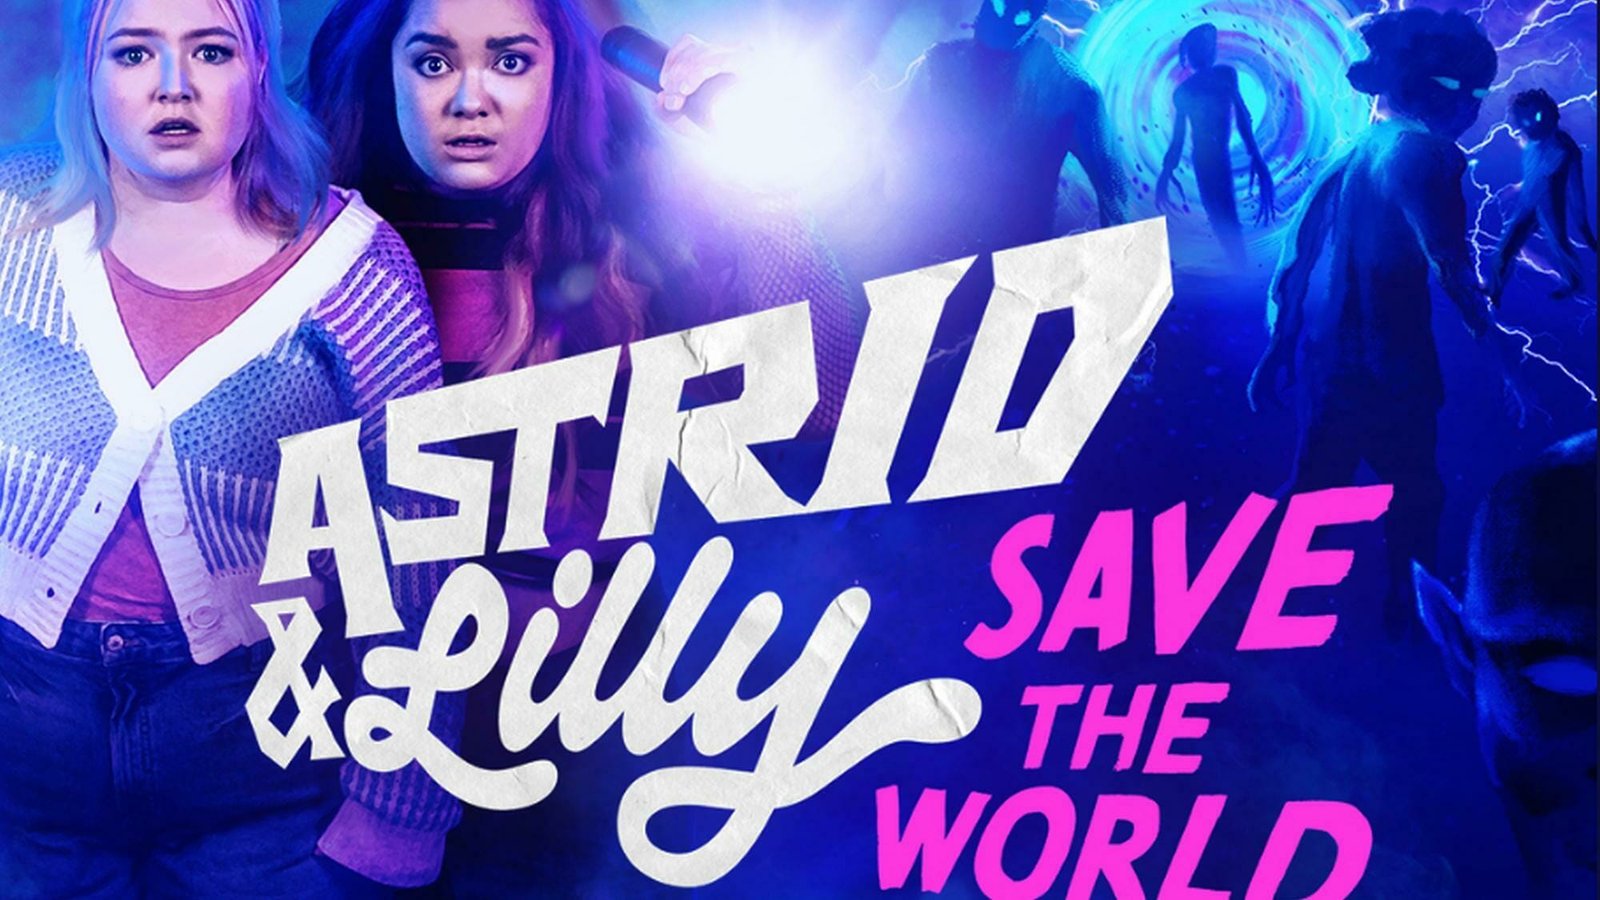 Astrid & Lilly Save the World Episode 4